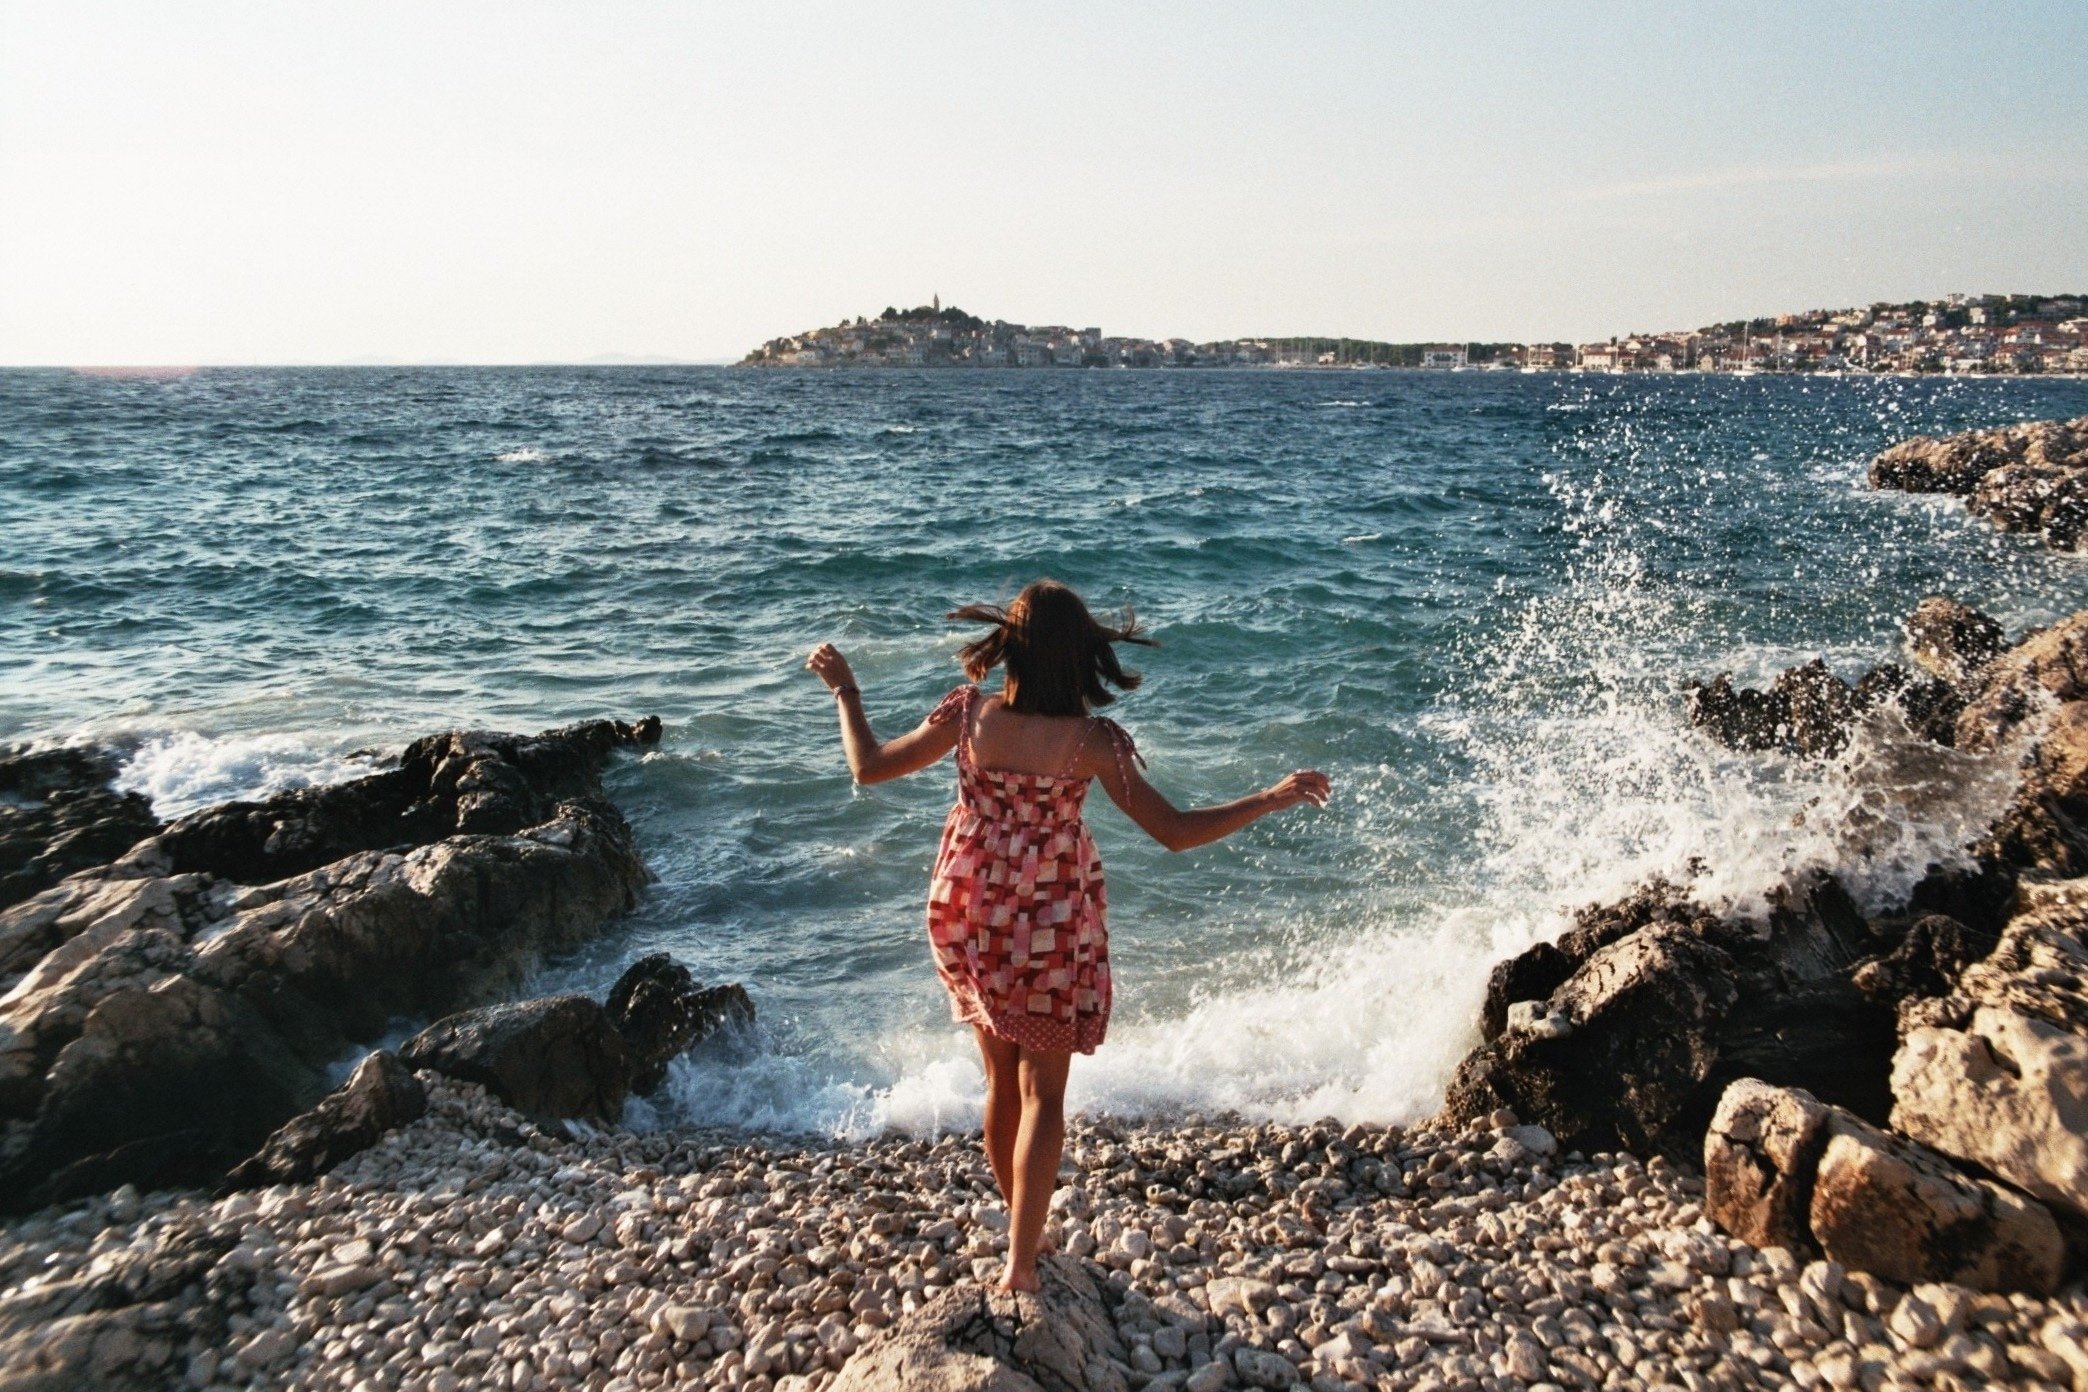 57 Things to Do to Make You Let Go More Easily